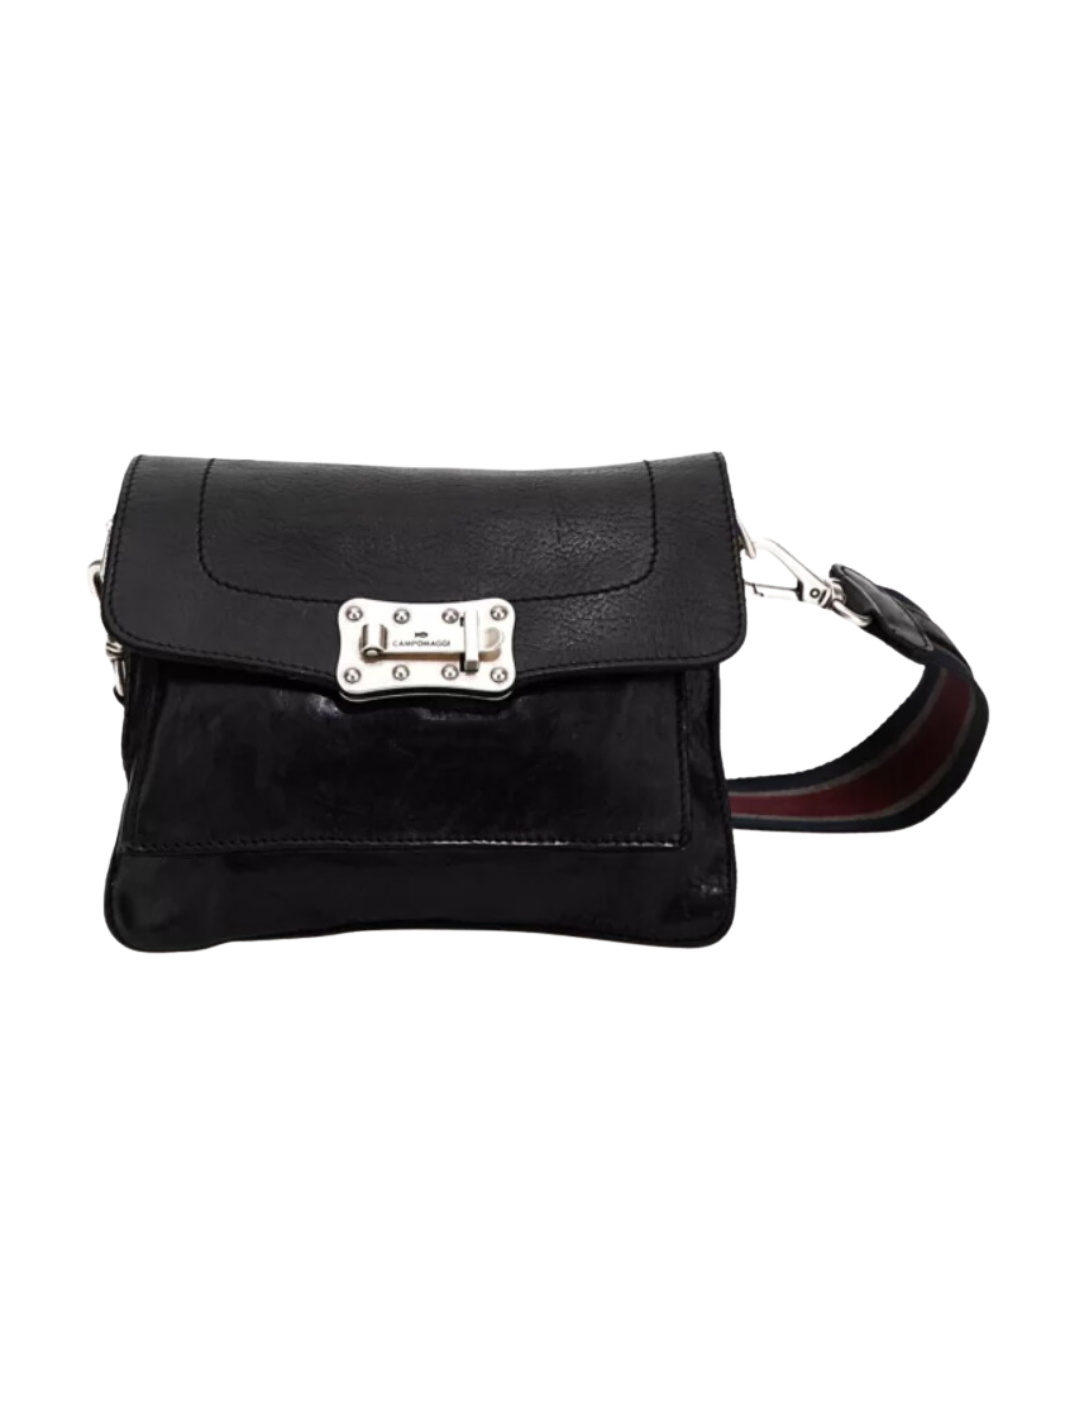 AGNESE LEATHER CROSSBODY BAG IN BLACK - Romi Boutique